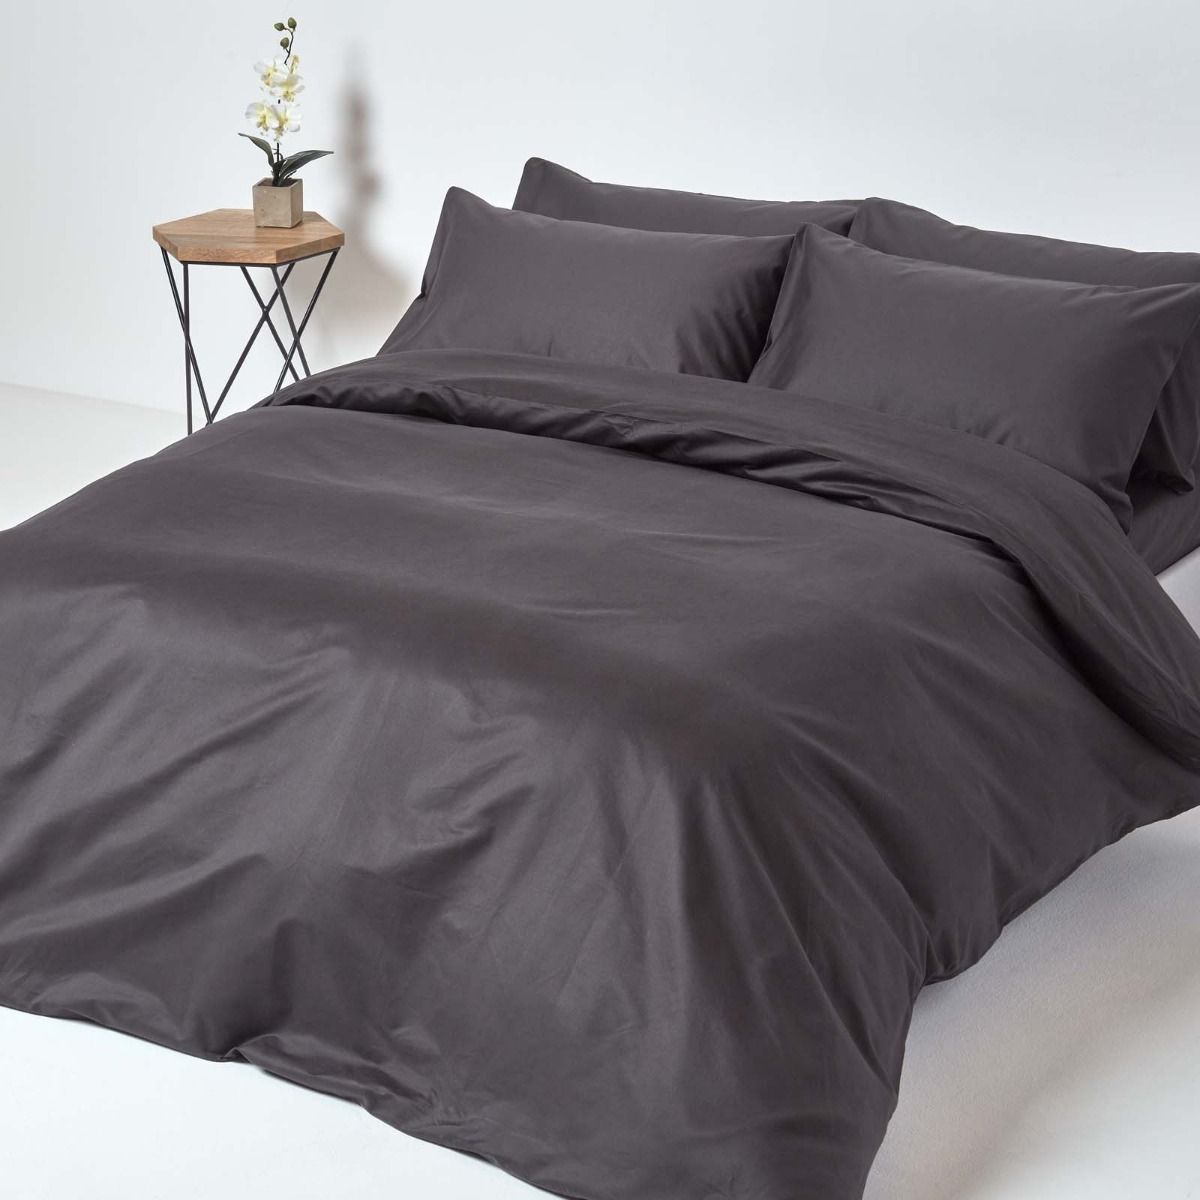 Dark Charcoal Grey Egyptian Cotton, What Is A High Thread Count For Duvet Cover